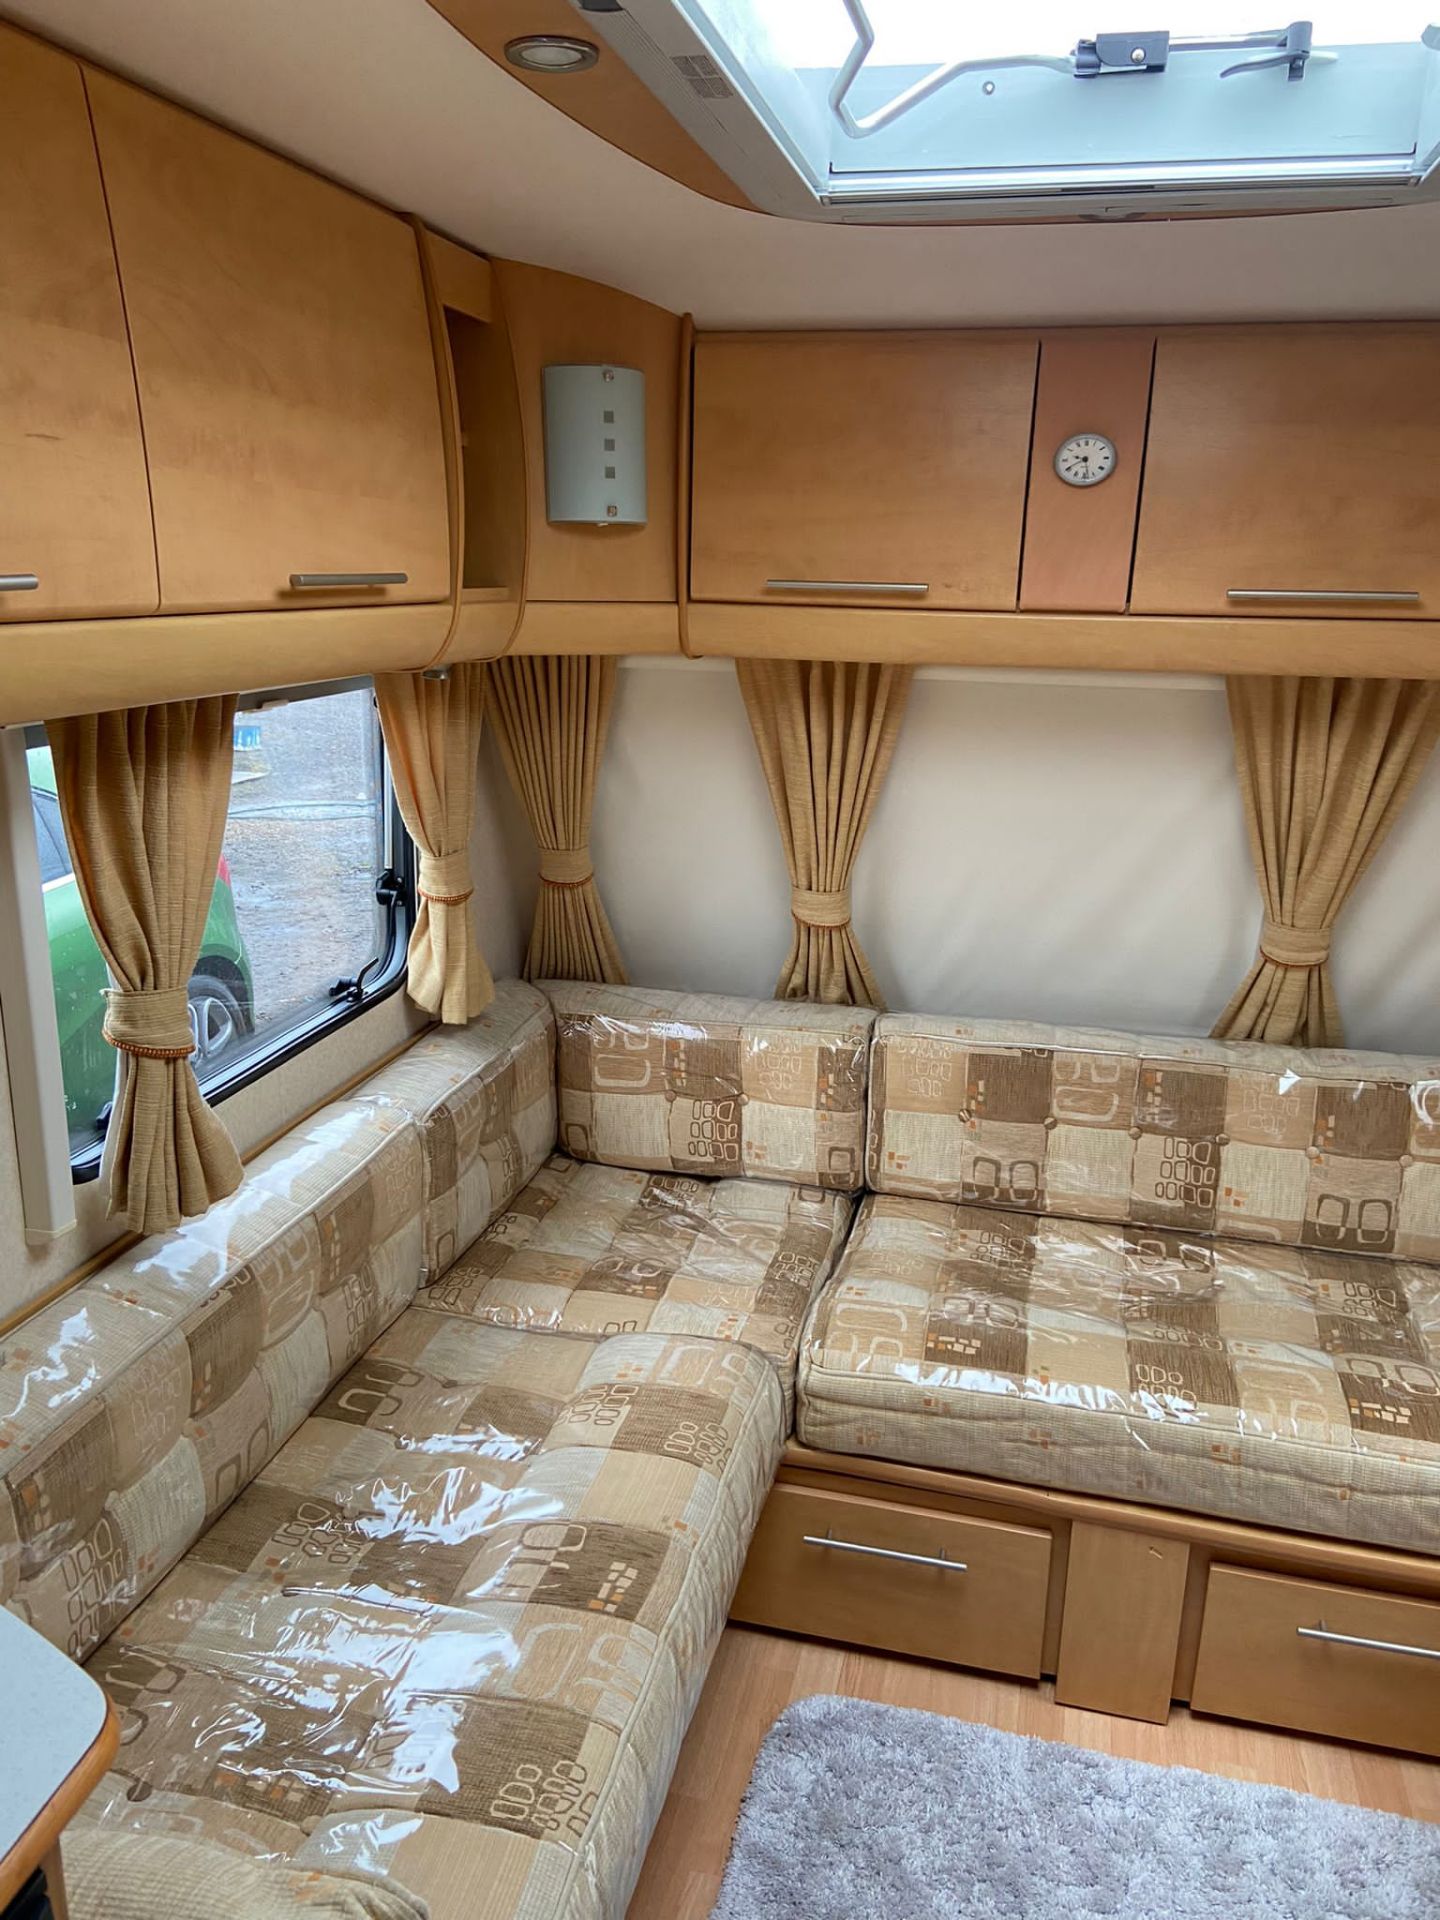 ** ON SALE ** Bailey Pageant series 6 - 4 Berth - '2007 Year' Middle Bathroom - No Vat - Image 7 of 11